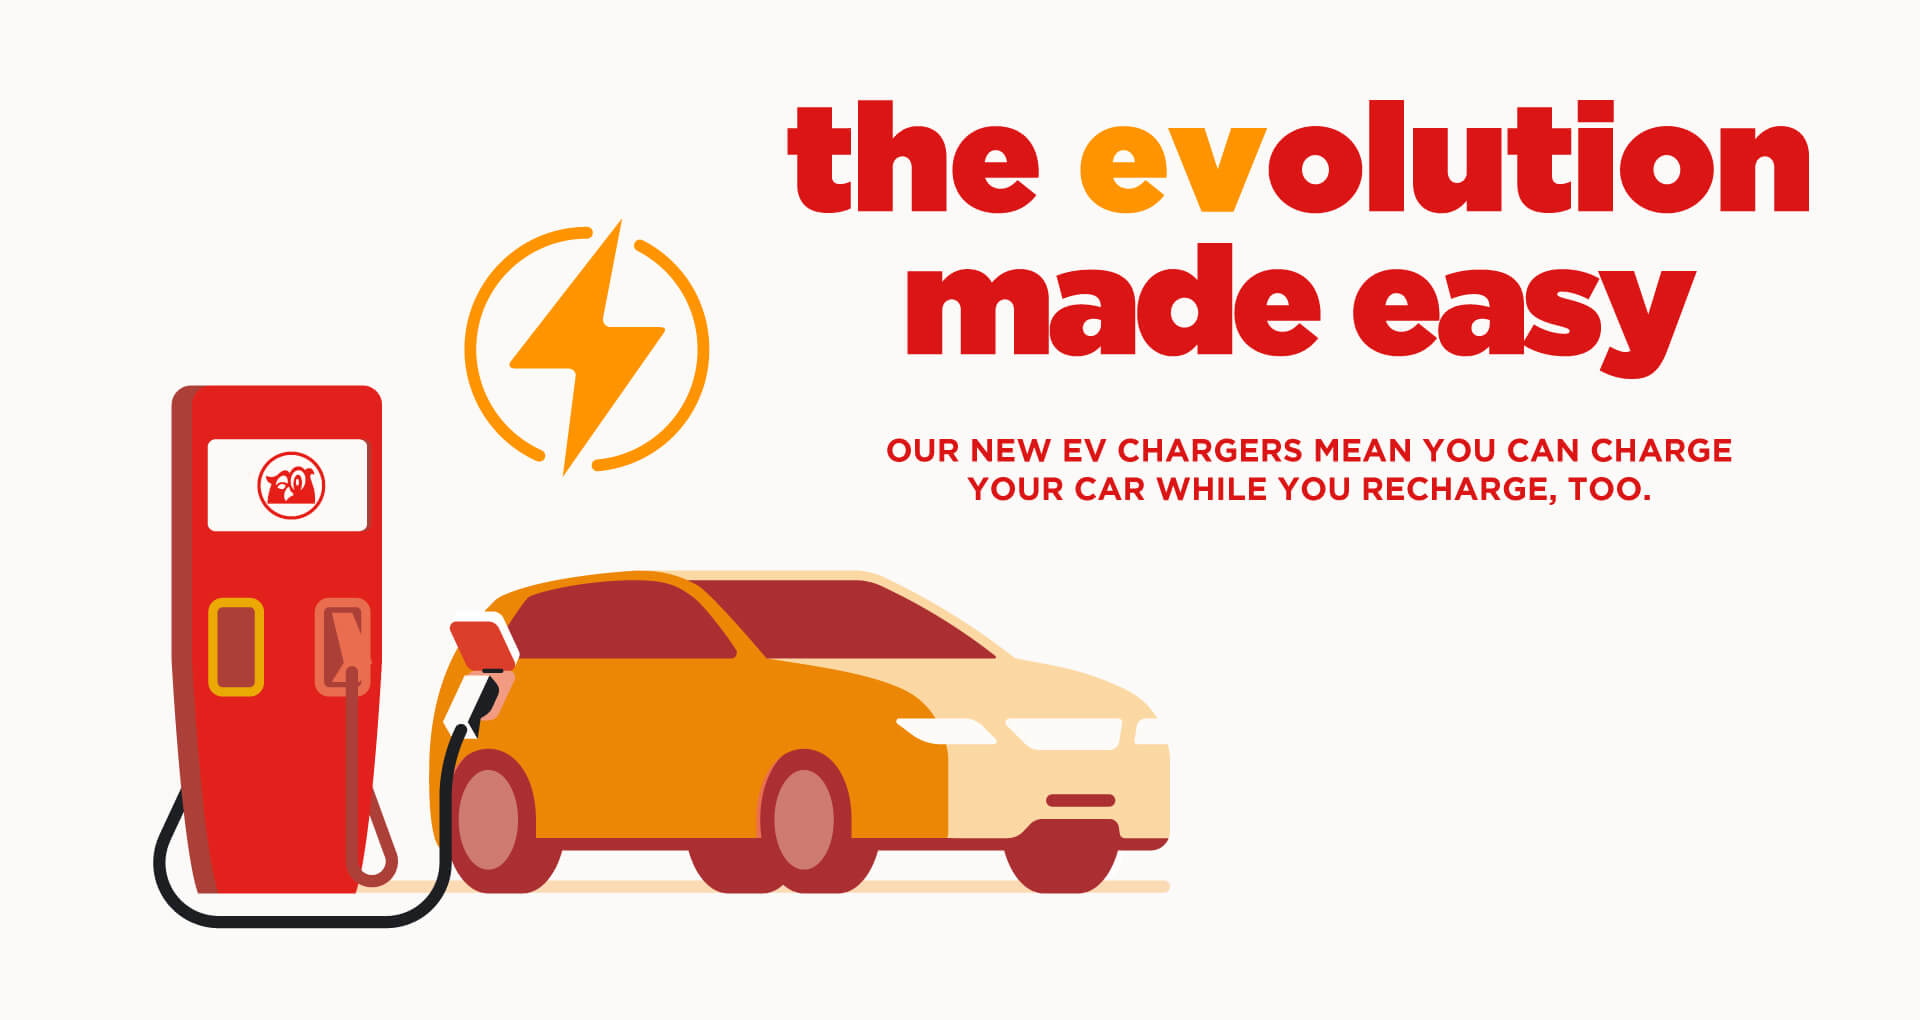 Our new EV charges mean you can charge your car while you recharge, too.